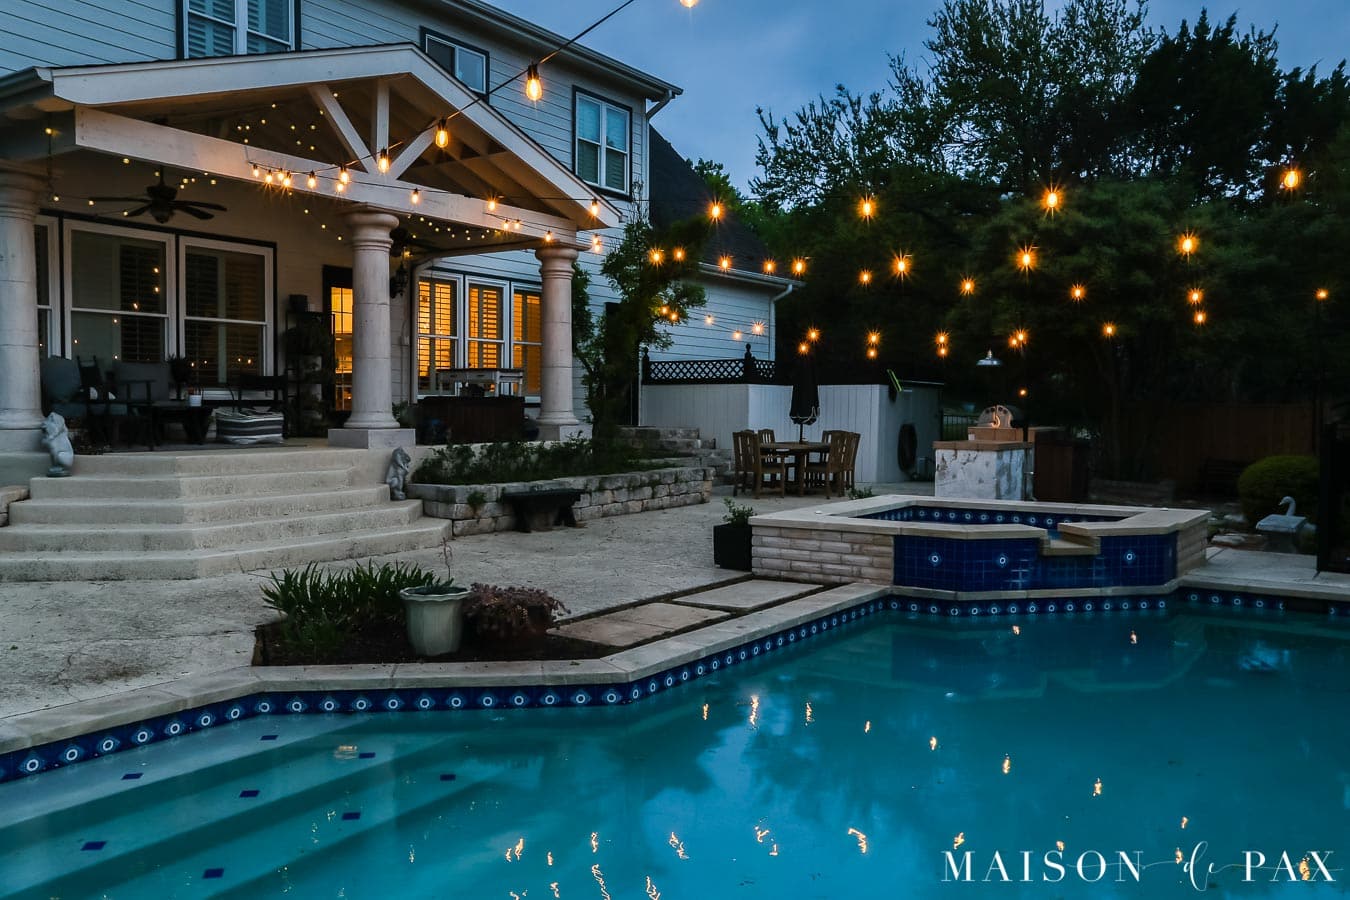 edison bulb outdoor string lights over pool